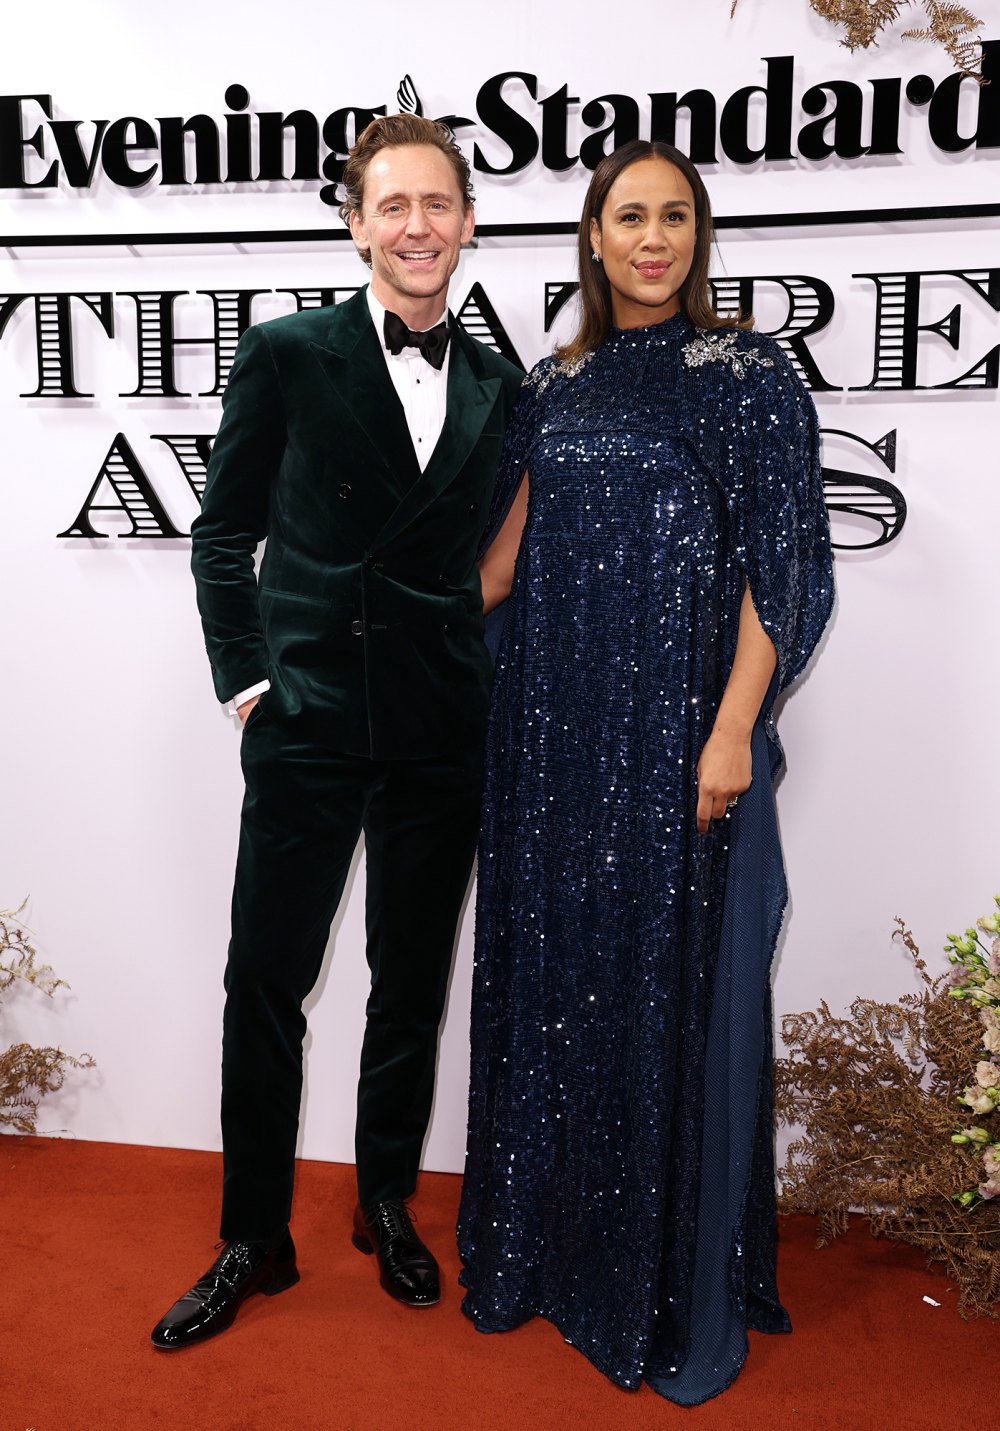 Tom Hiddleston and Zawe Ashton enjoy a date night on the red carpet at the Evening Standard Theater Awards